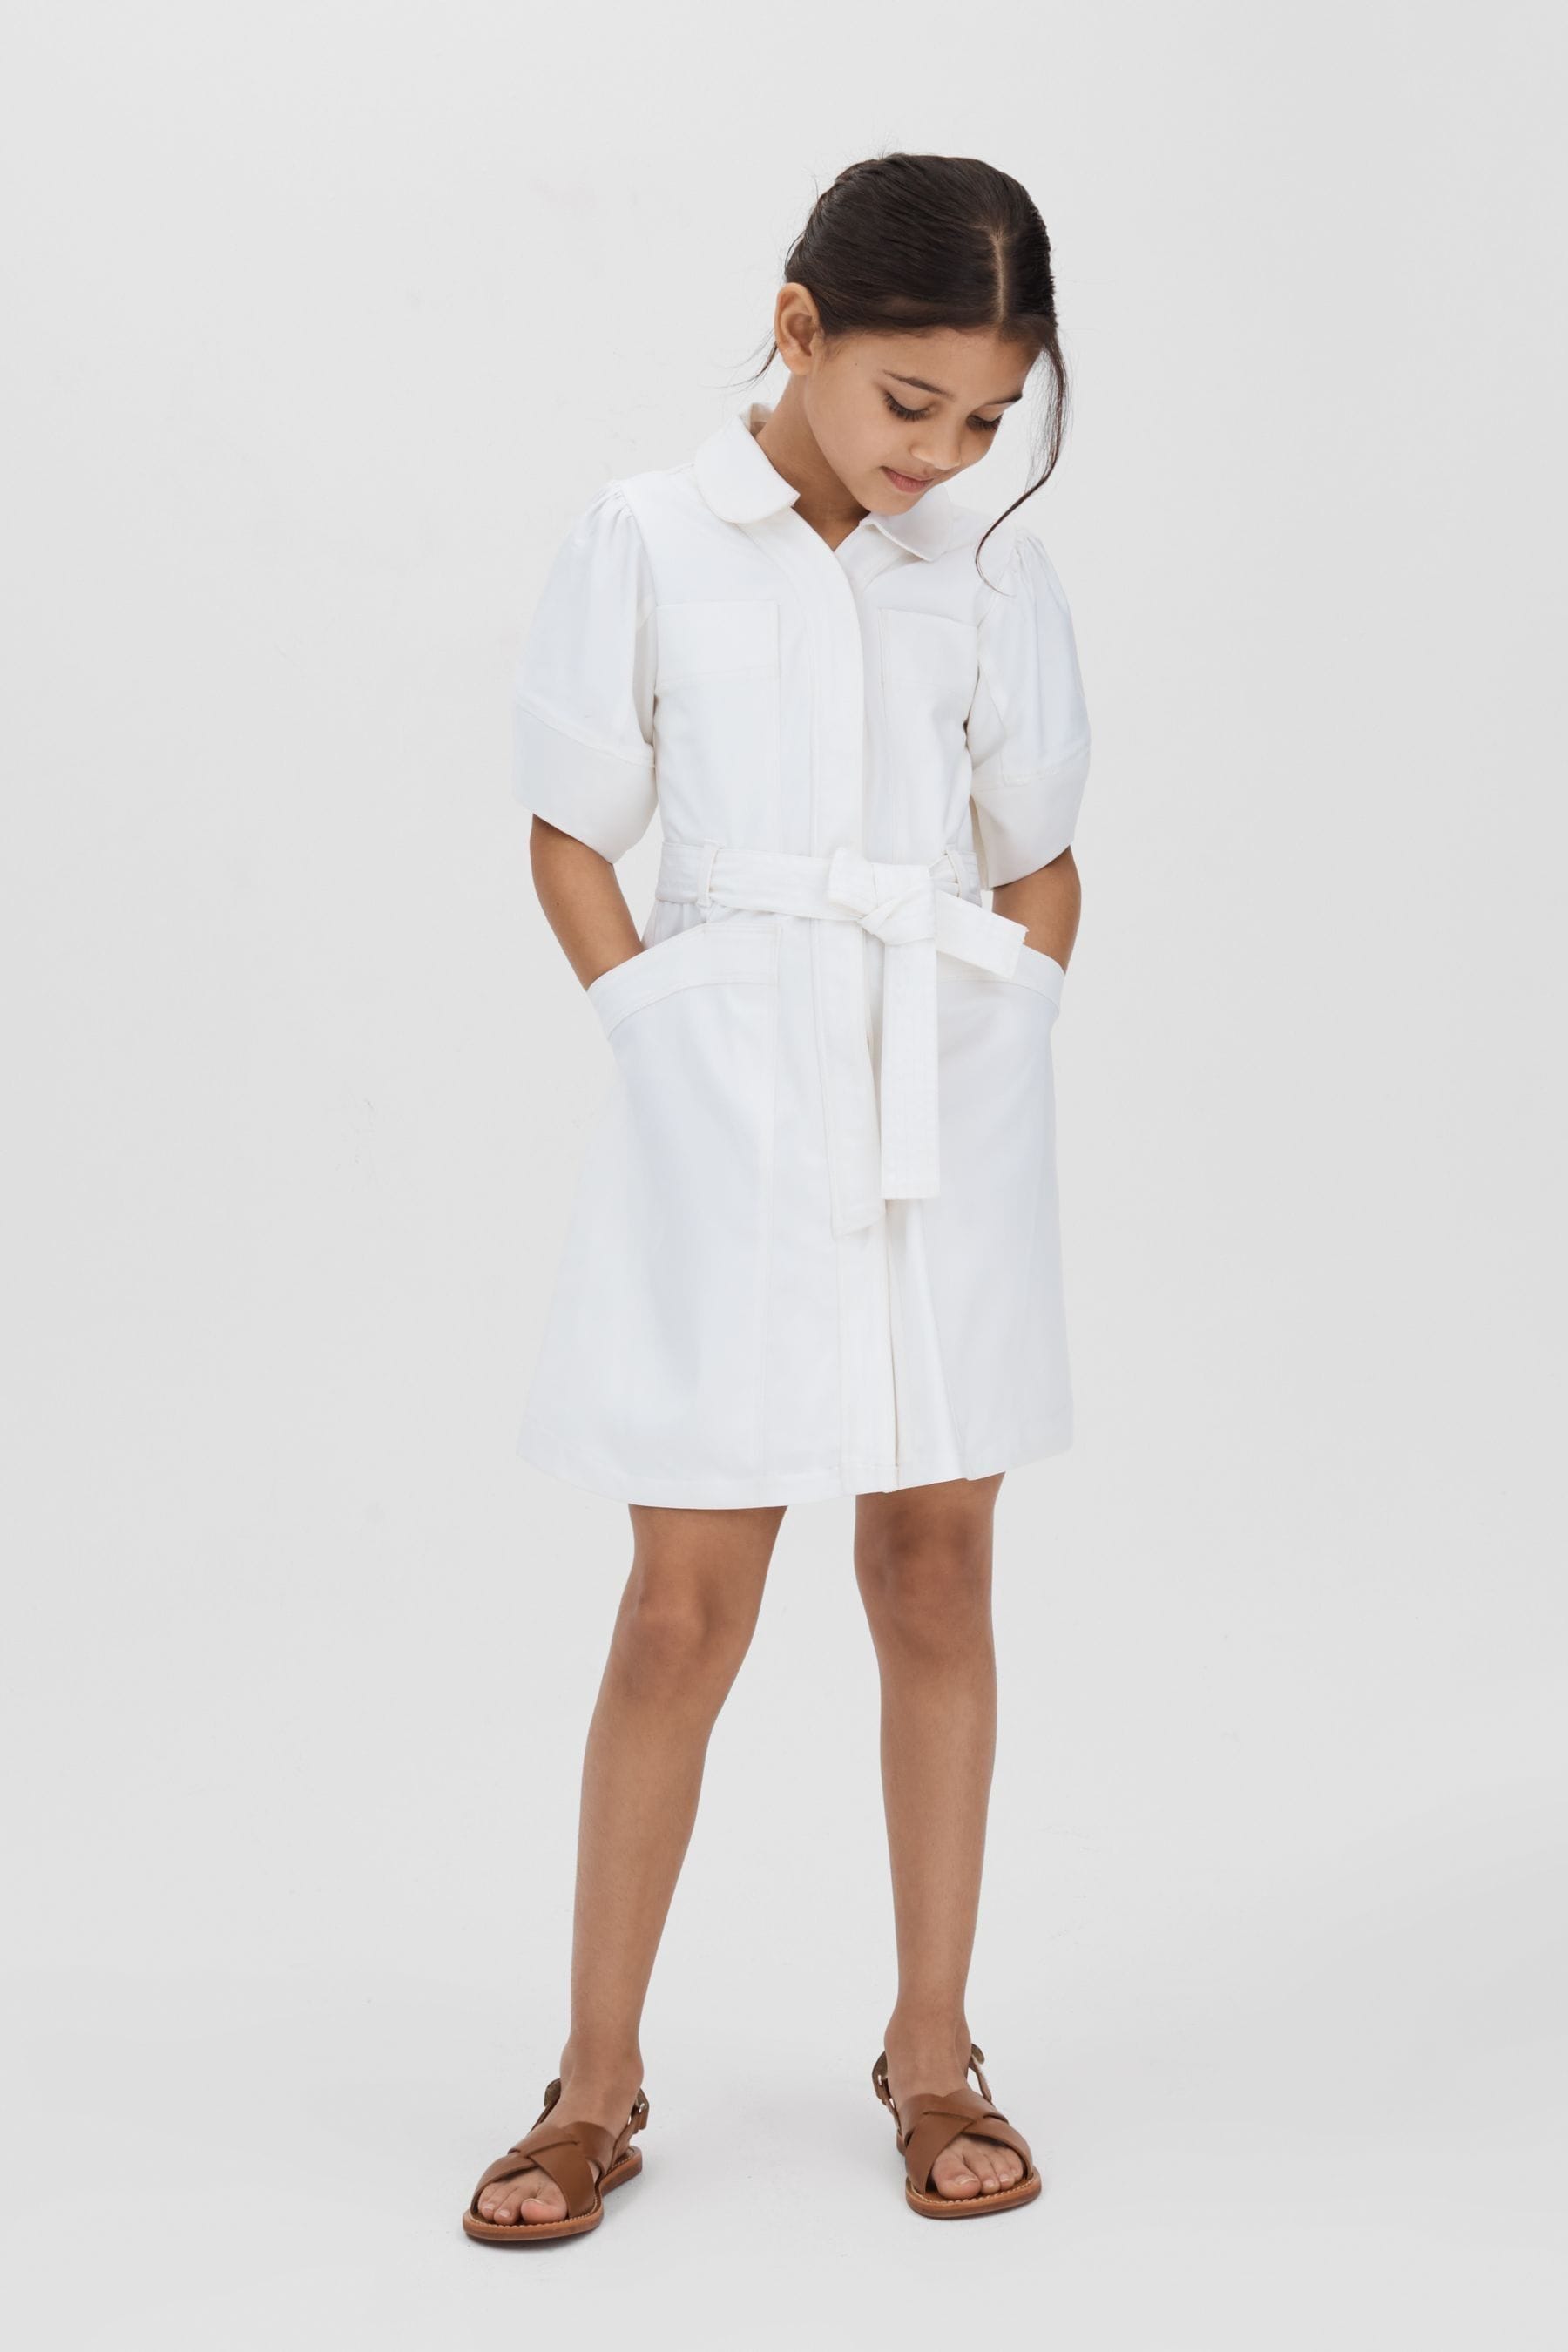 Reiss Kids' Ginny - Ivory Junior Belted Puff Sleeve Dress, Uk 7-8 Yrs In White